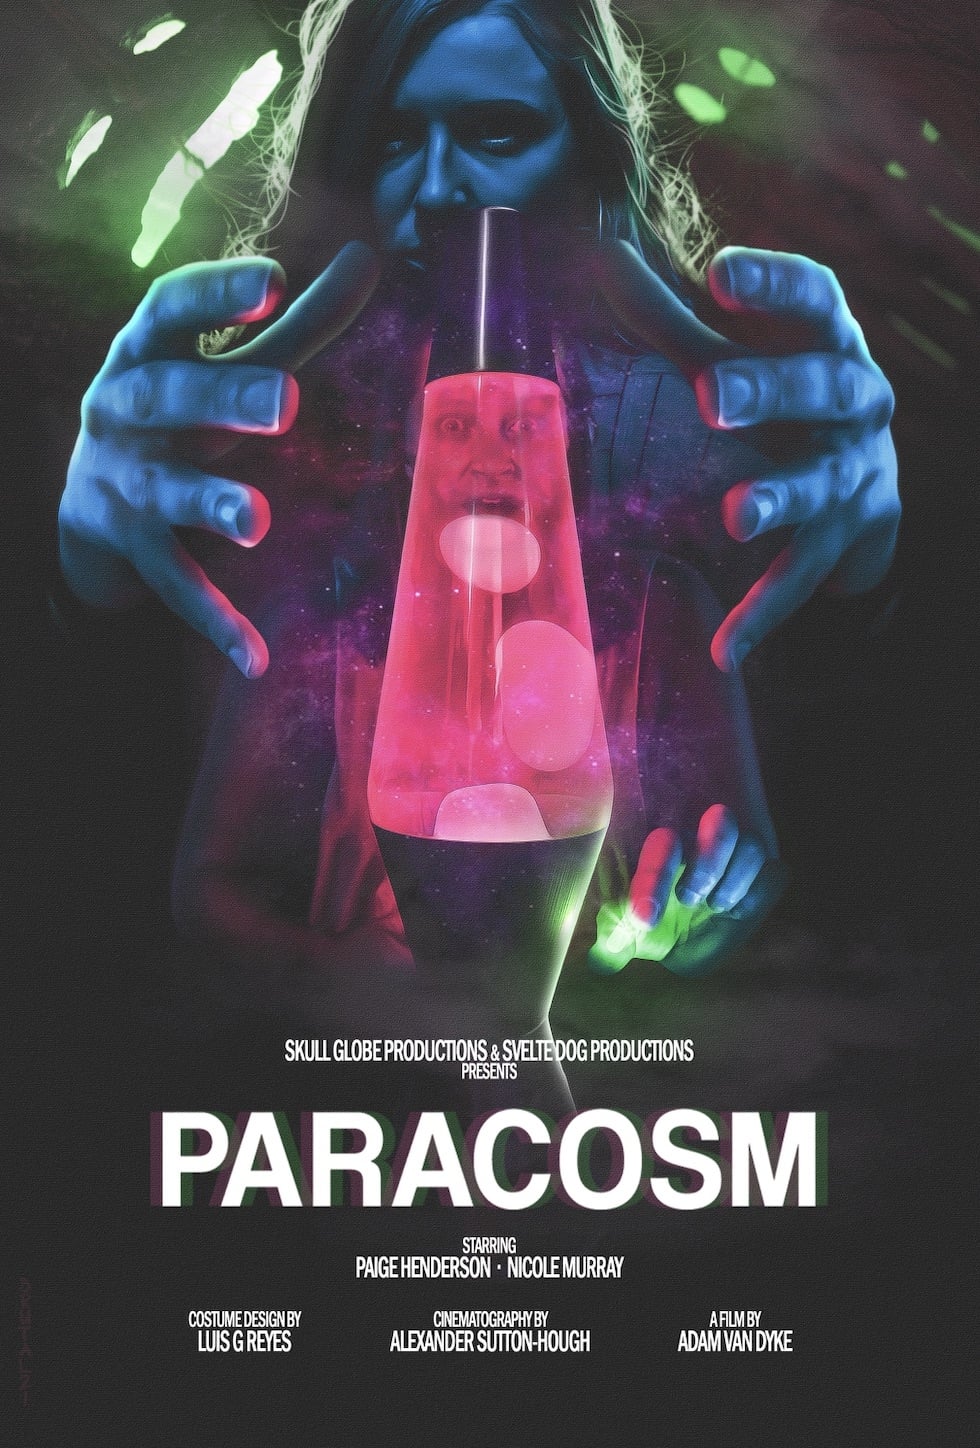 PARACOSM